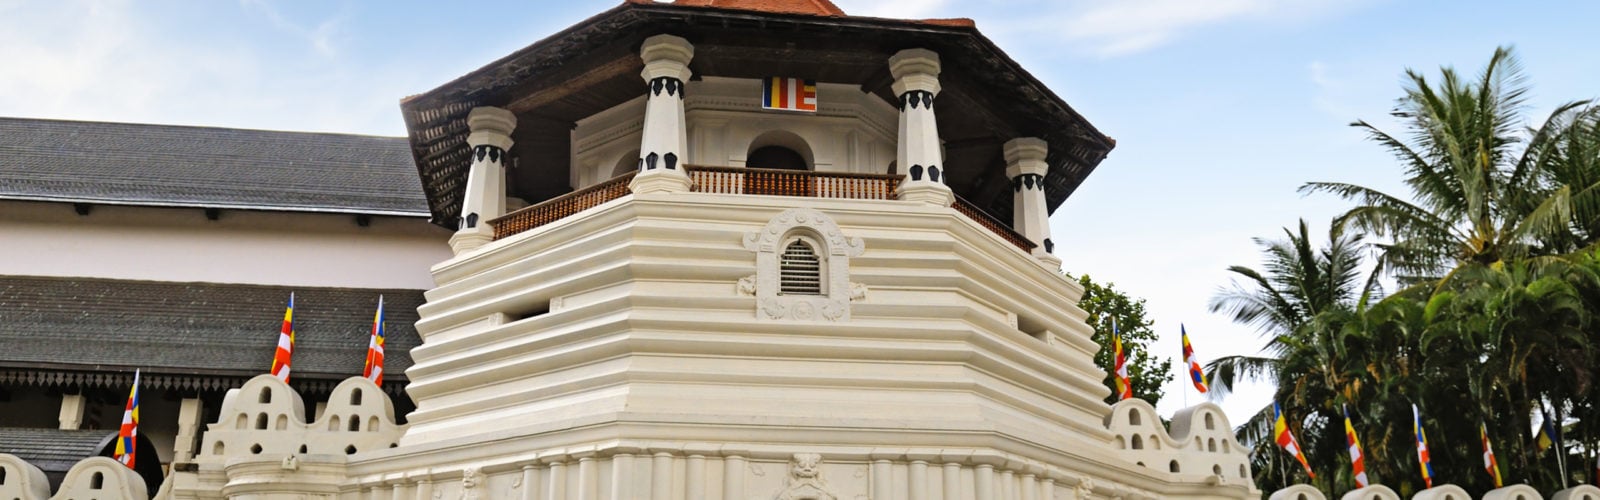 kandy-tooth-temple